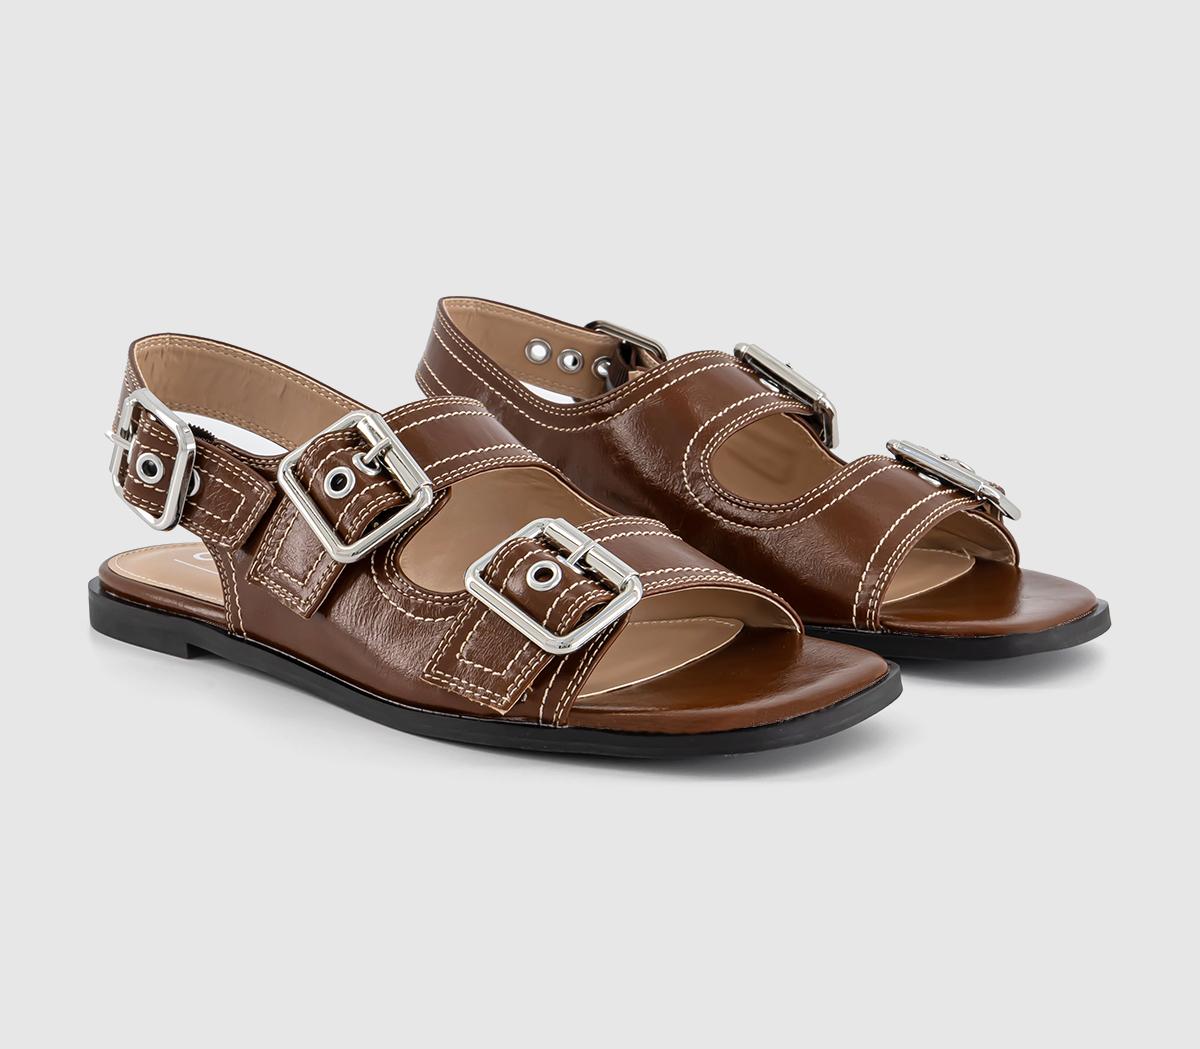 OFFICE Womens Stealth Double Buckle Contrast Stitch Sandals Brown, 3